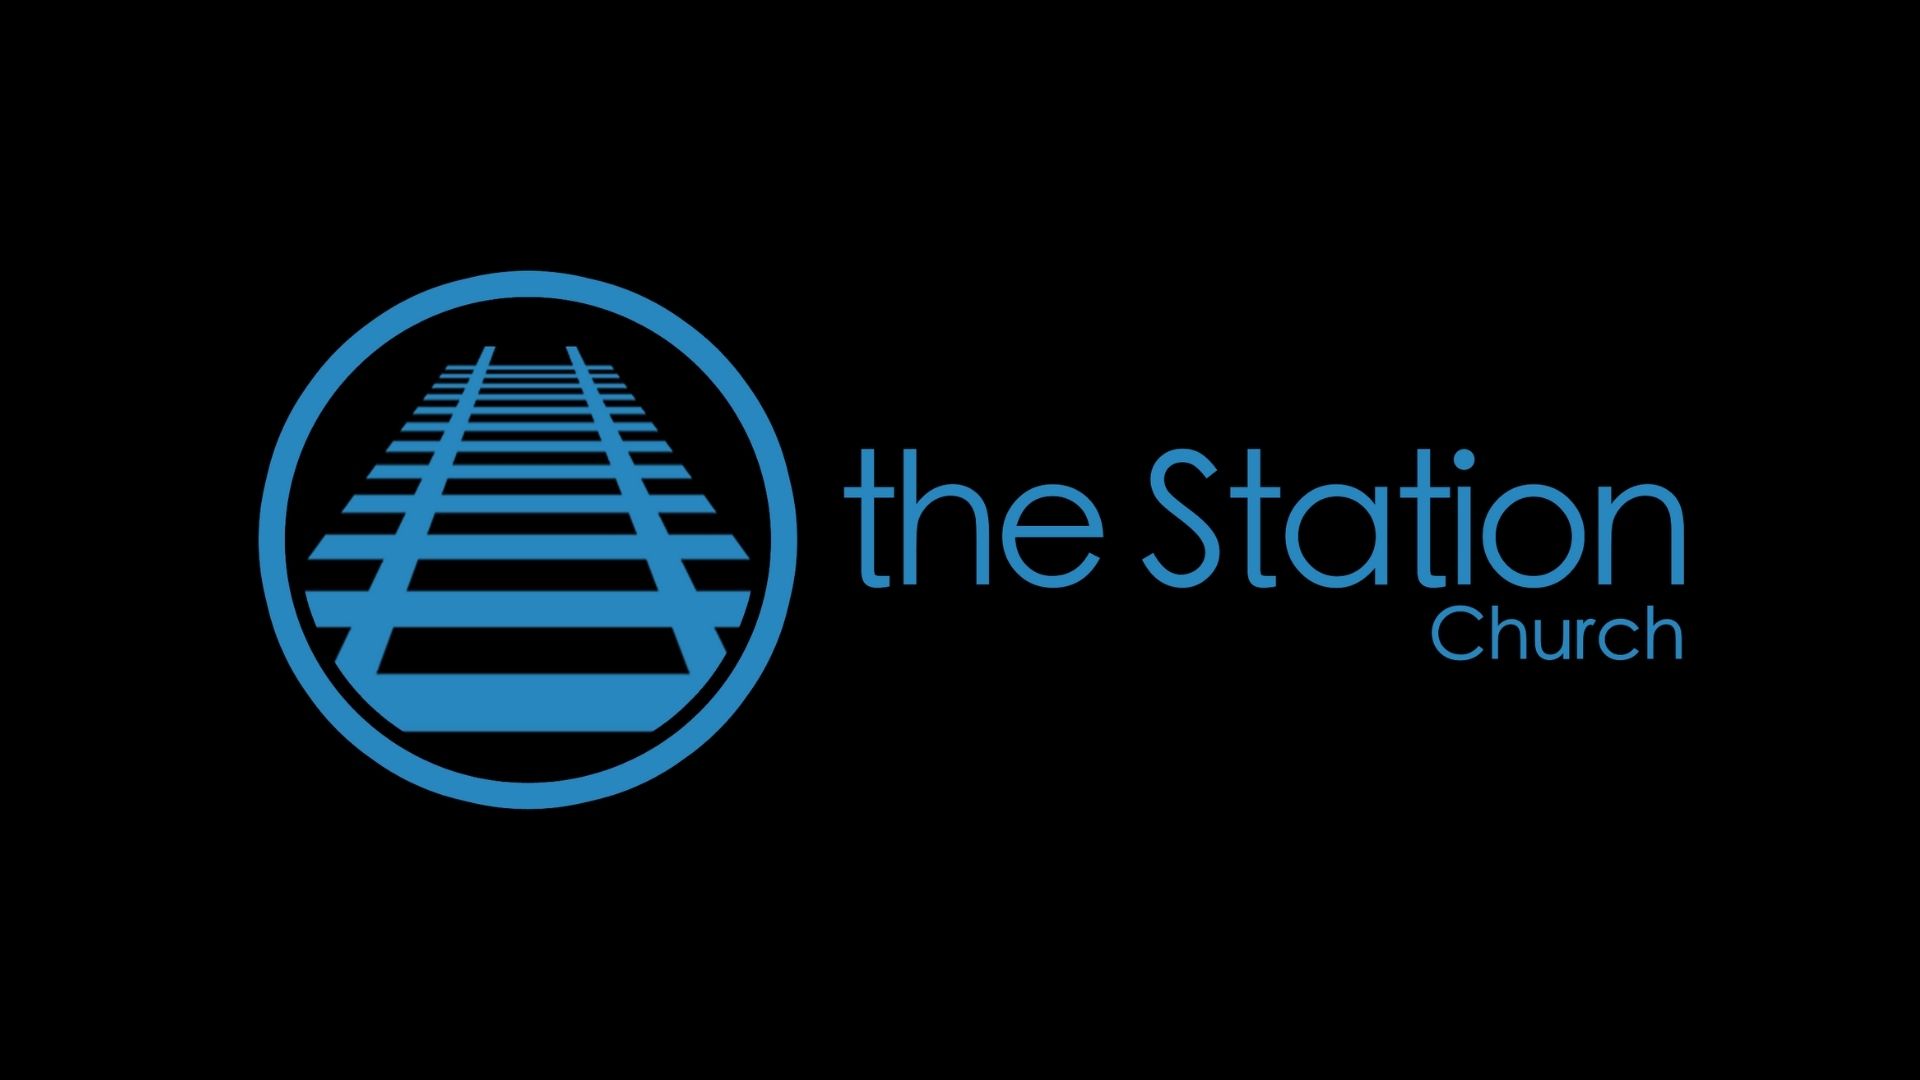 Image of Station Church Logo at The Station Church in Hoover, Alabama